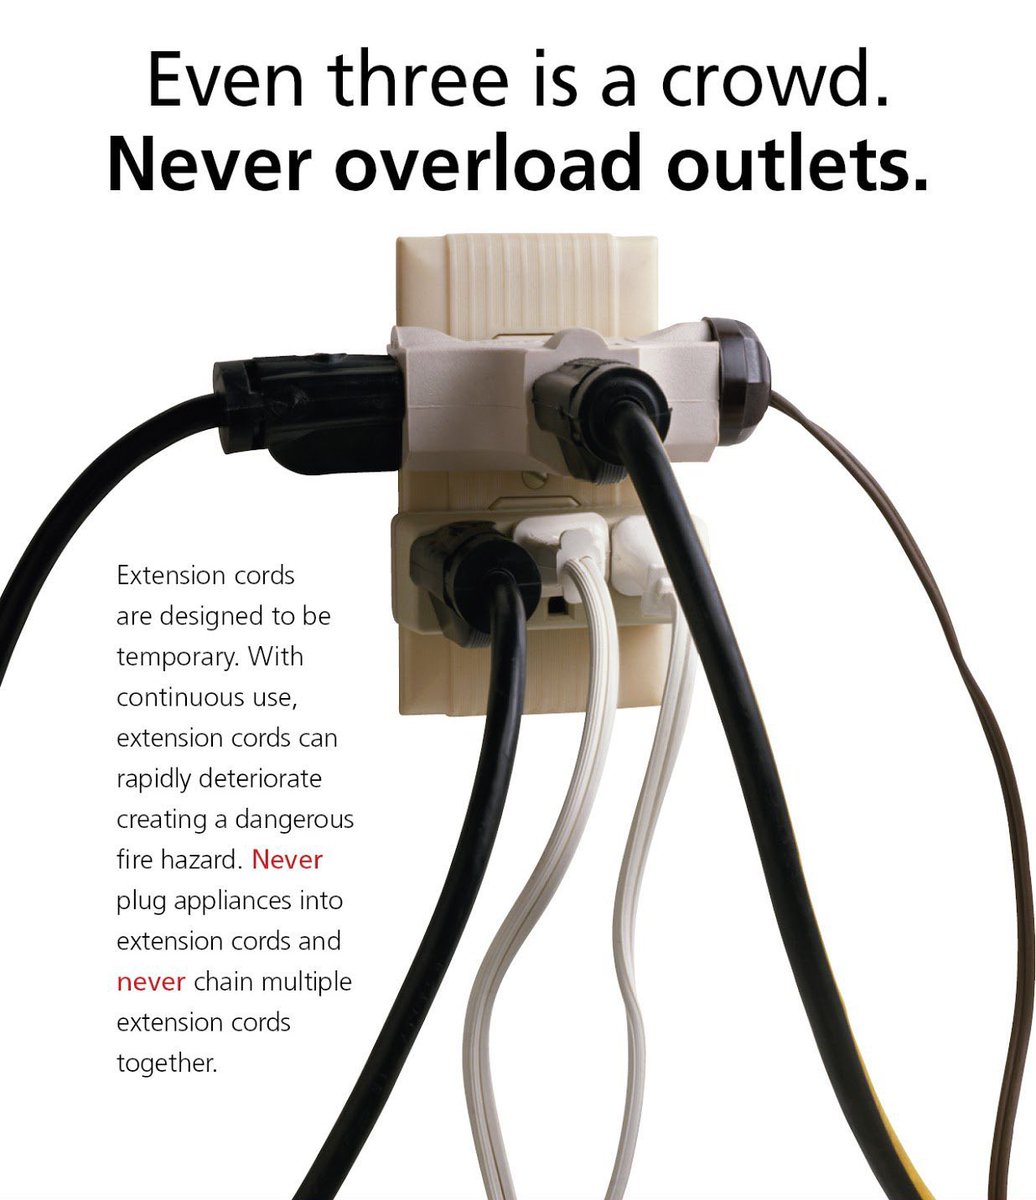 Help reduce the risk of electrical fires. Never overload electrical outlets or power strips. #StaySafeAtHome
#FireSafety